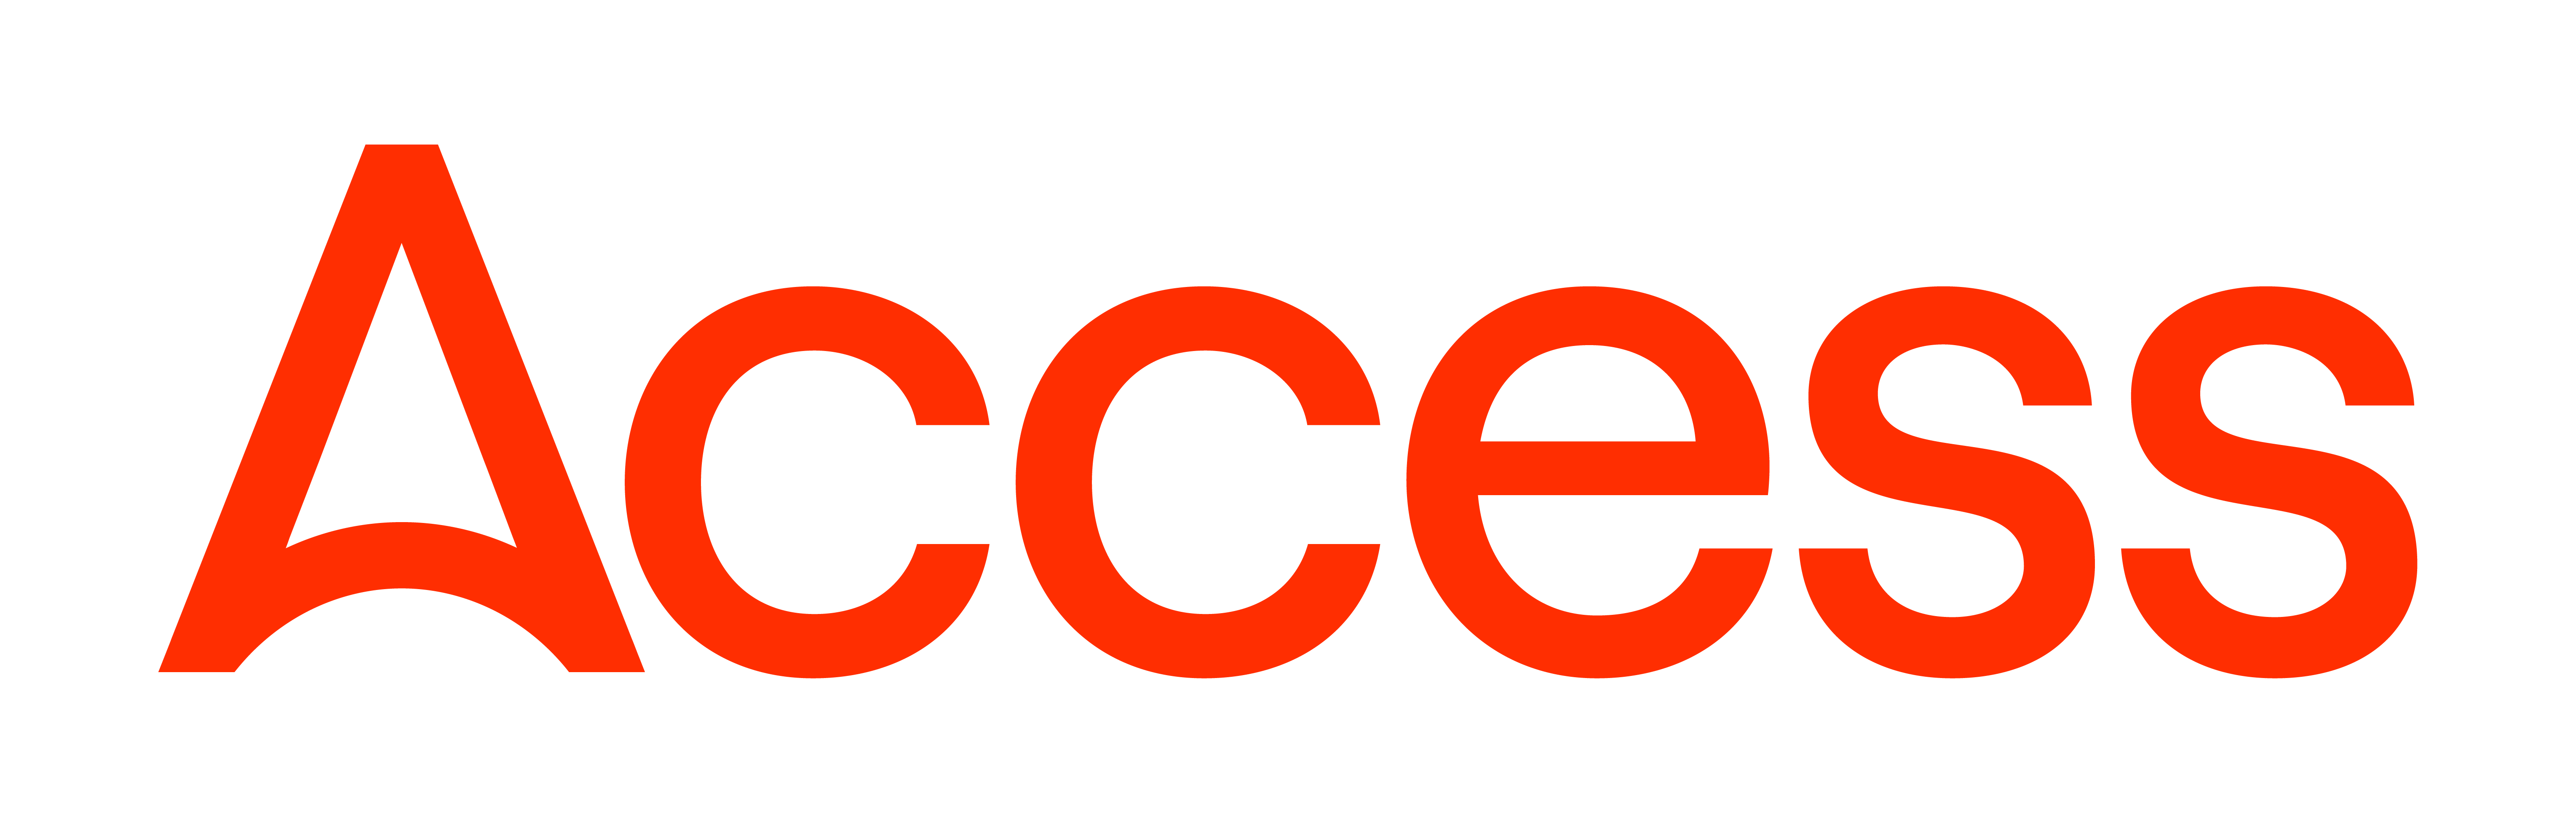 Access_PrimaryLogo_Cherry.png